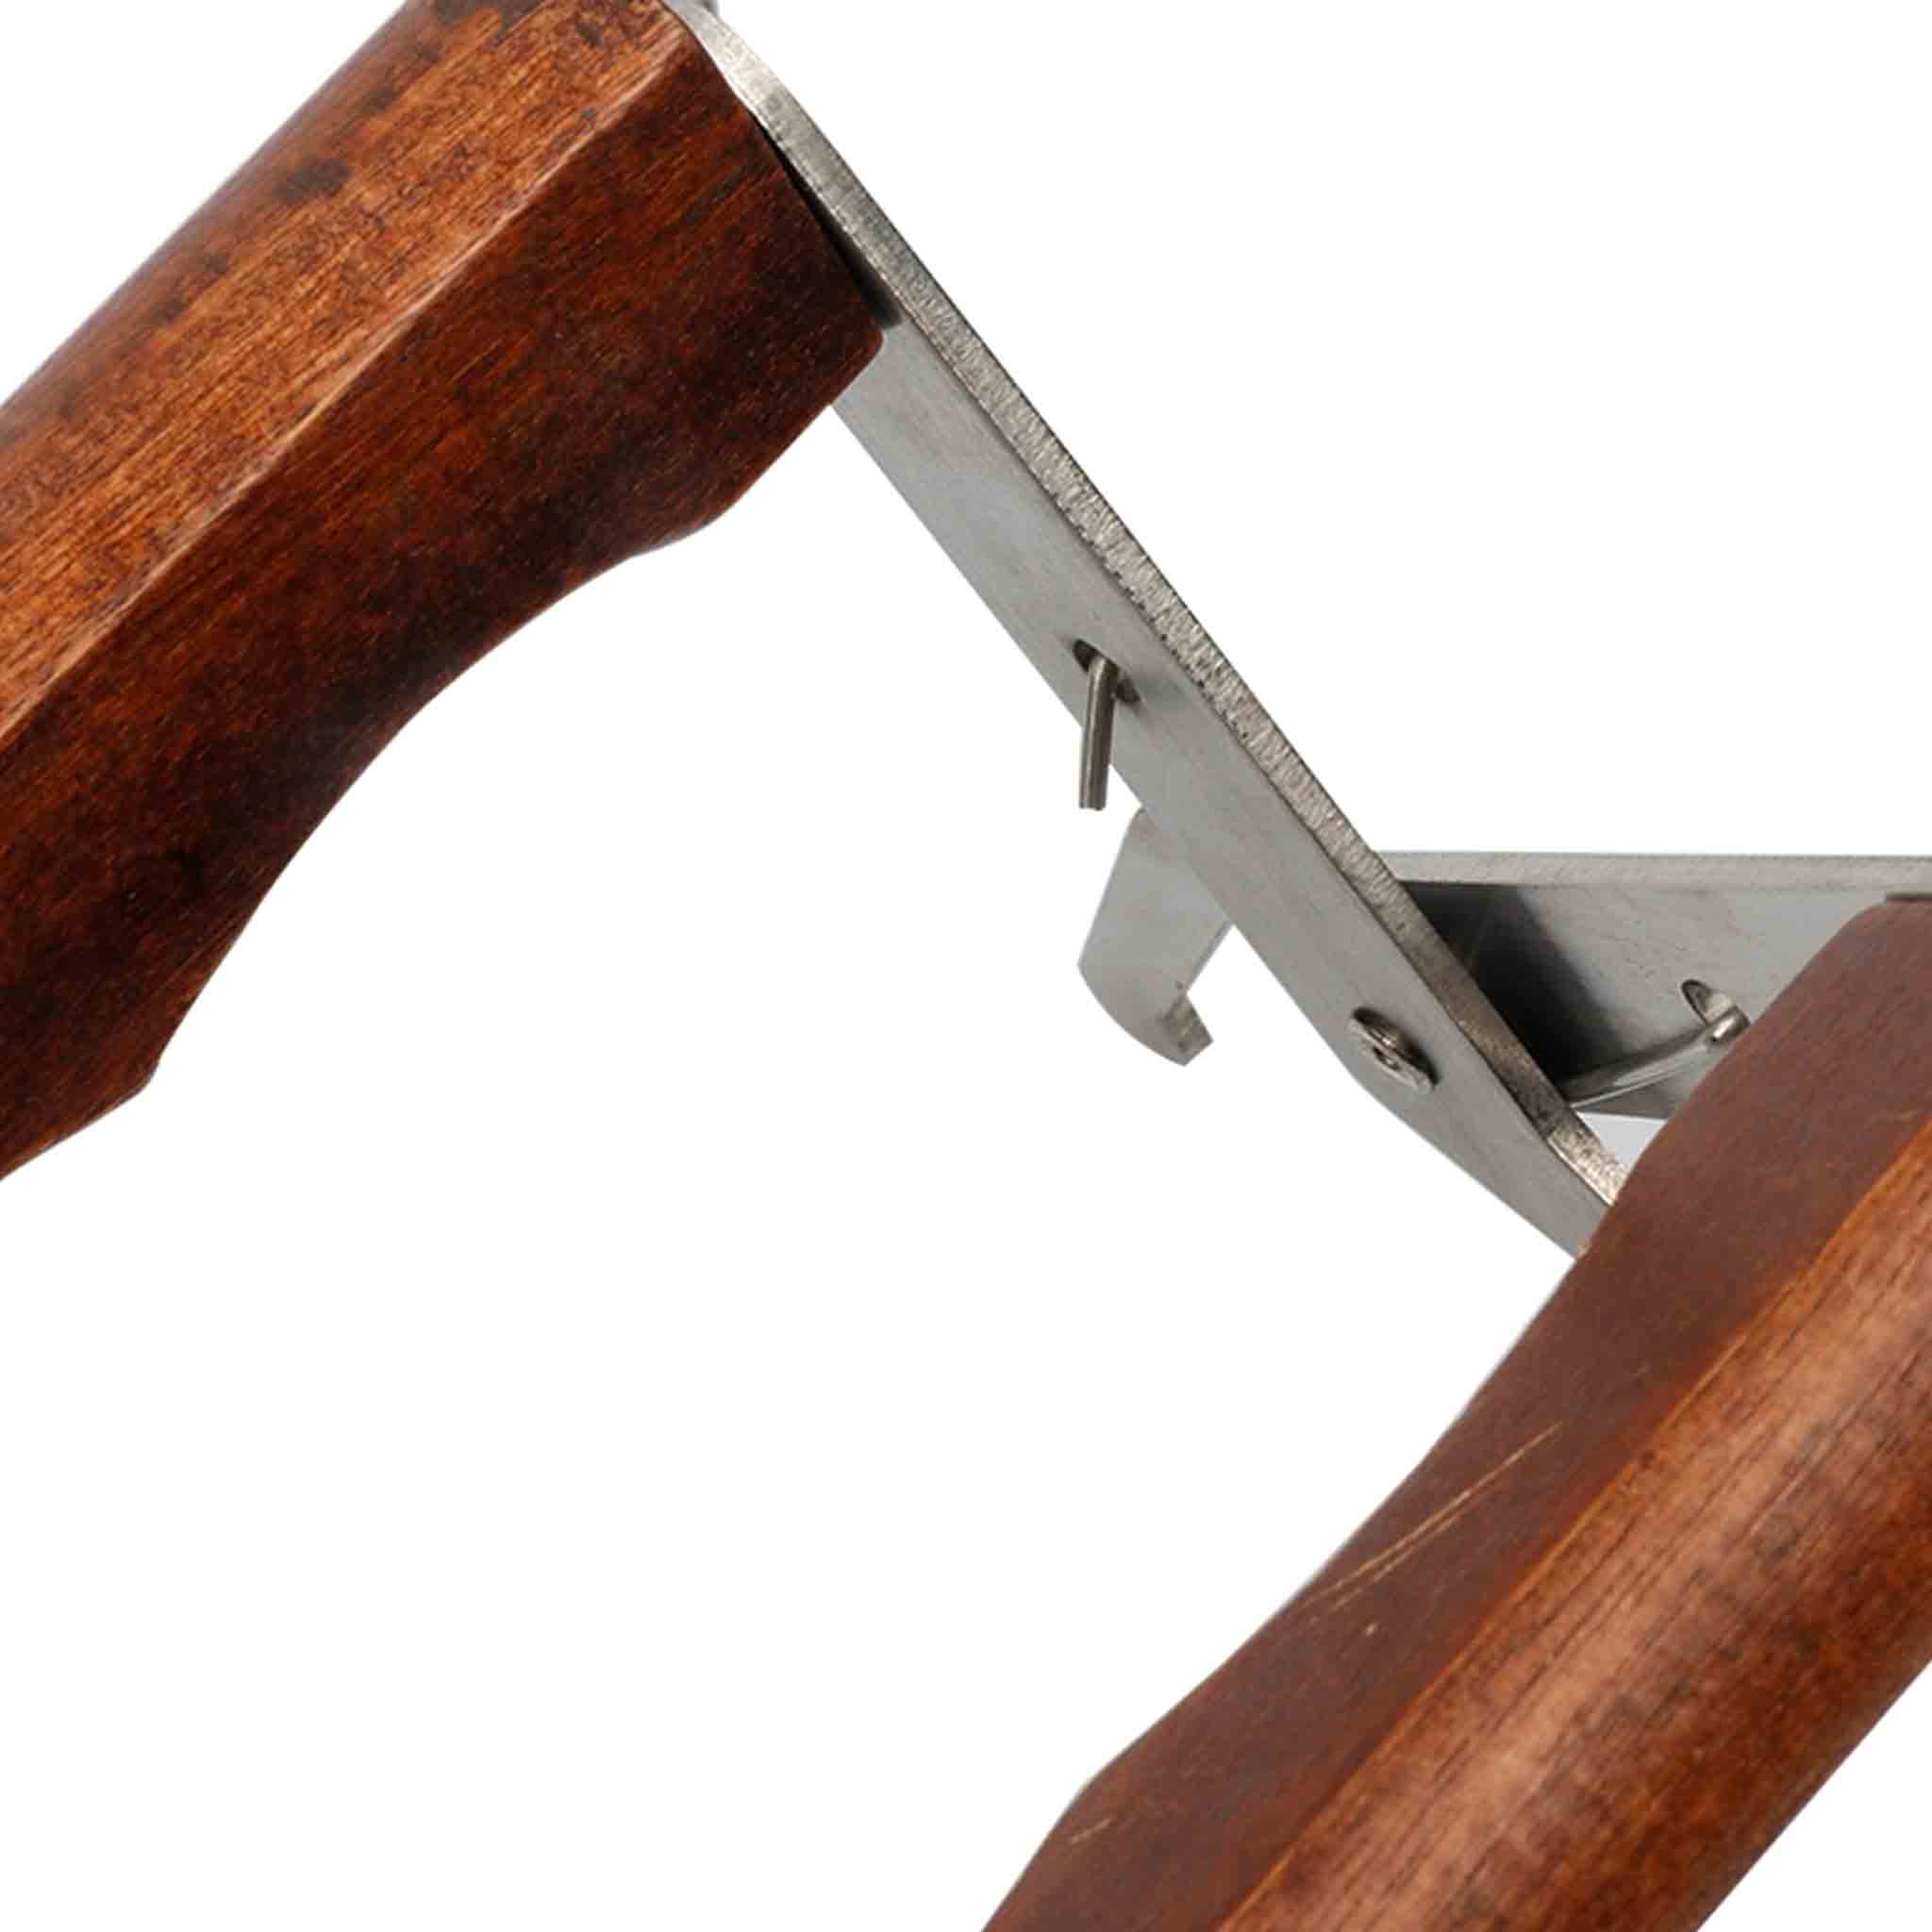 Stainless Steel Frame Grip with Wooden Handles - Tools collection by Buzzbee Beekeeping Supplies